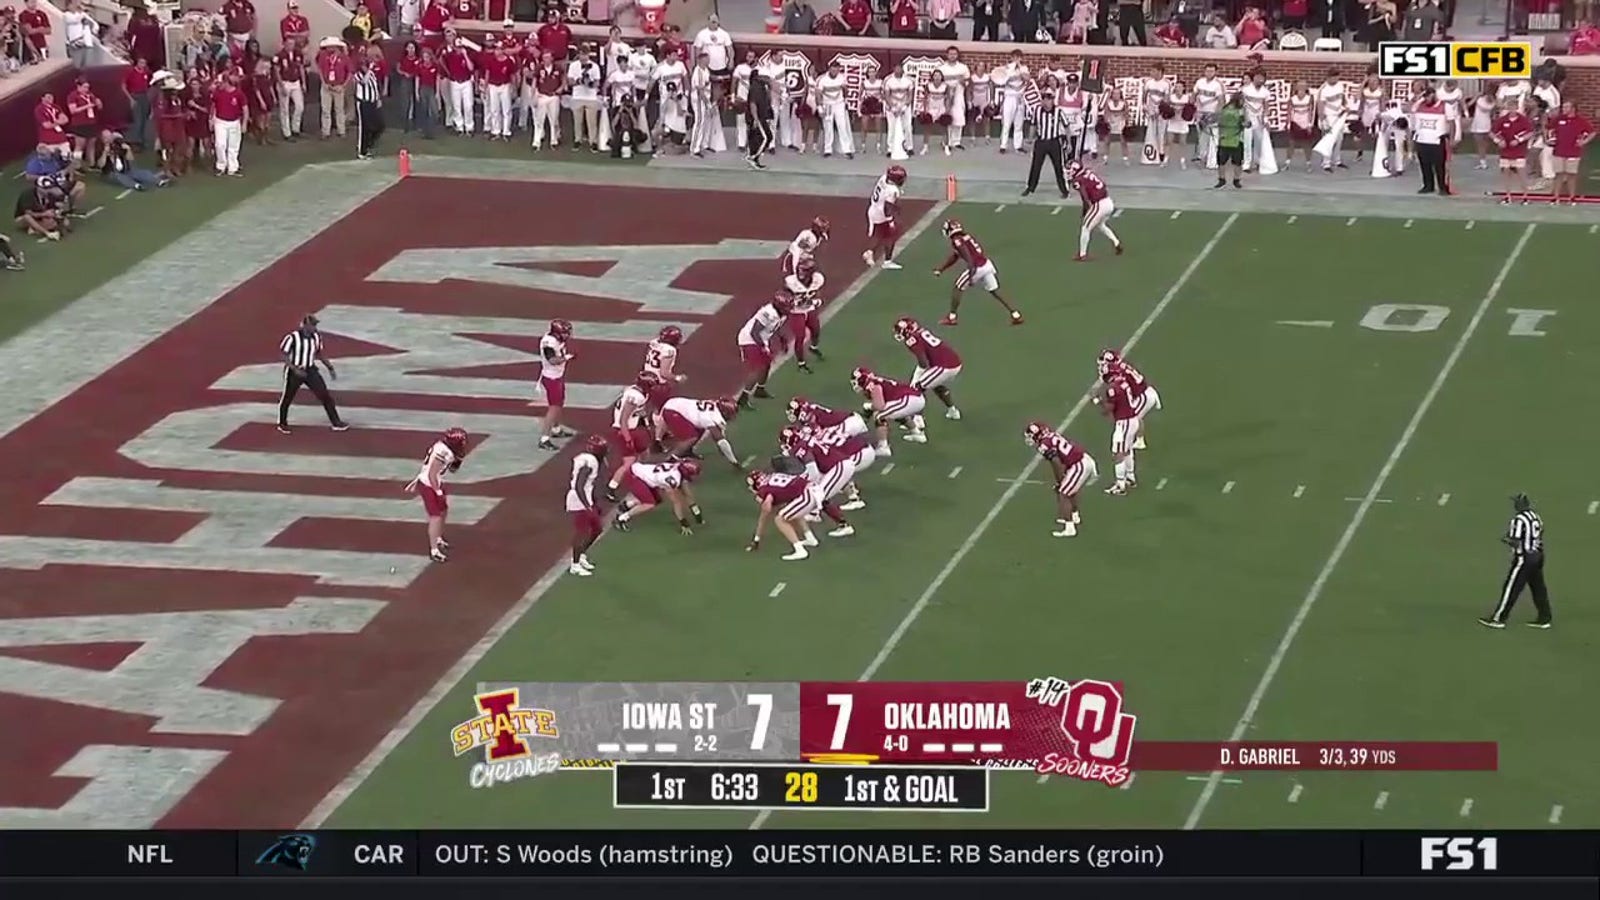 Dillon Gabriel punches in on a one-yard rushing TD to give Oklahoma a 14-7 lead over Iowa State